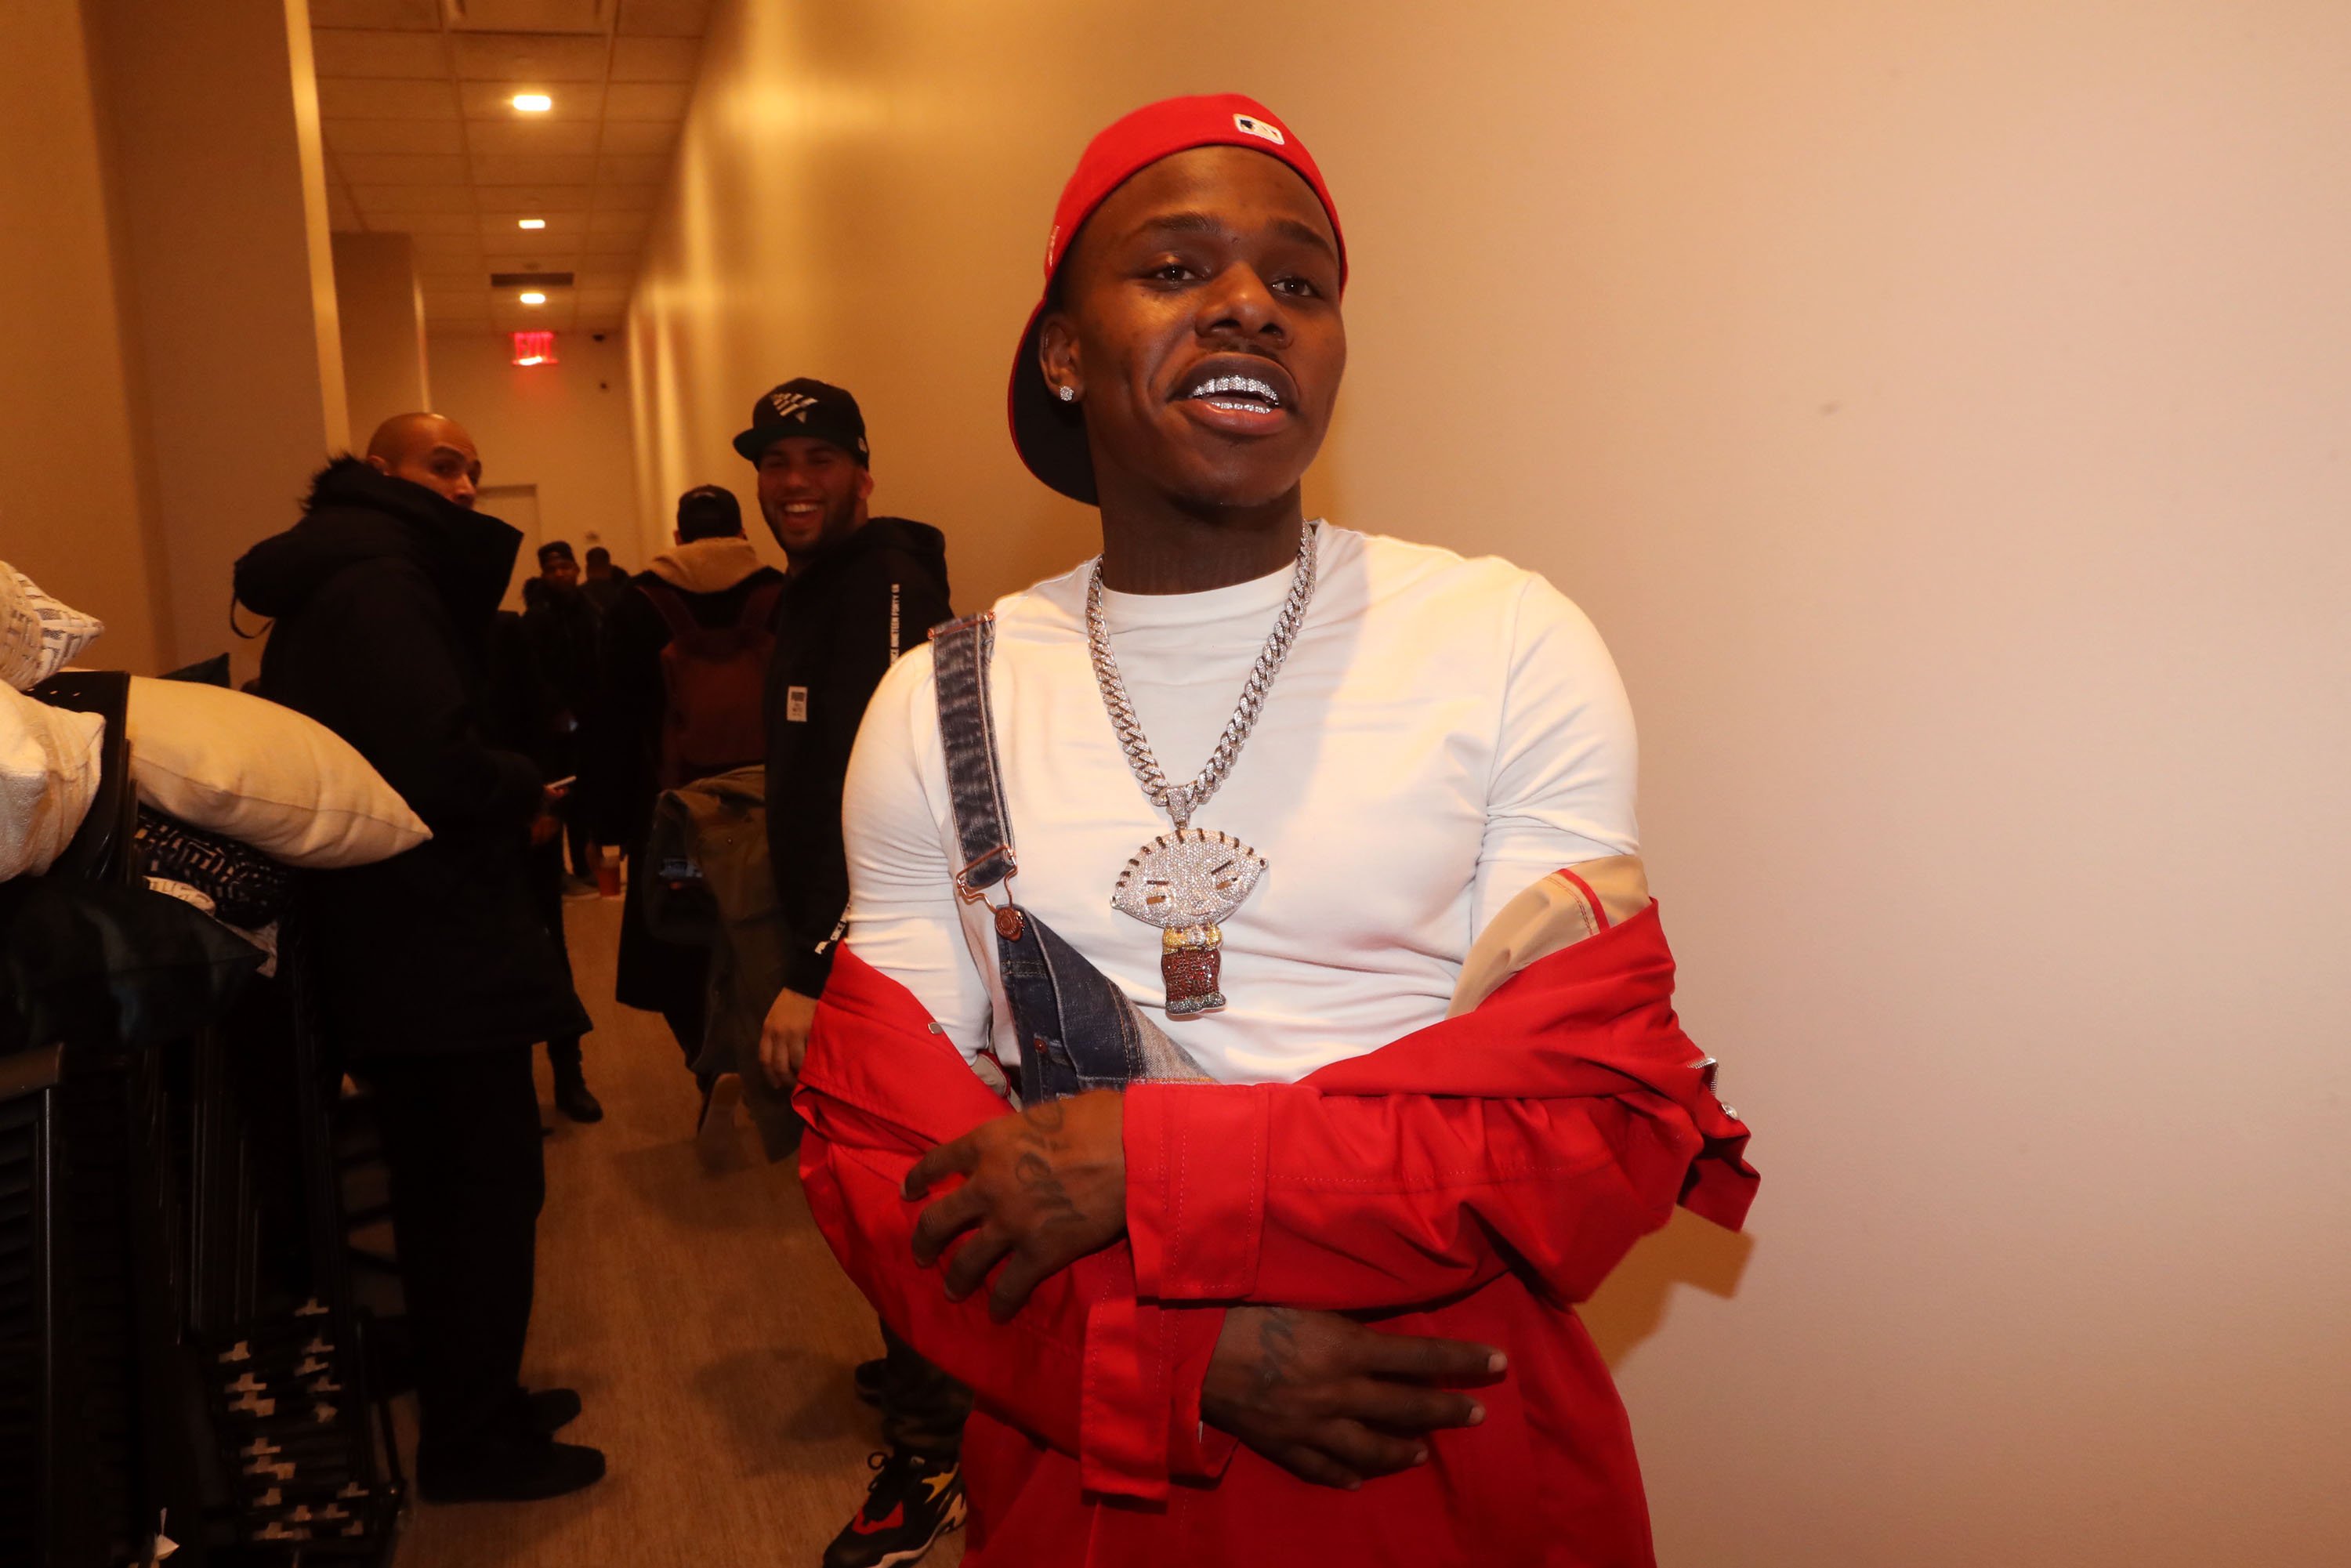 DaBaby backstage in New York in 2019